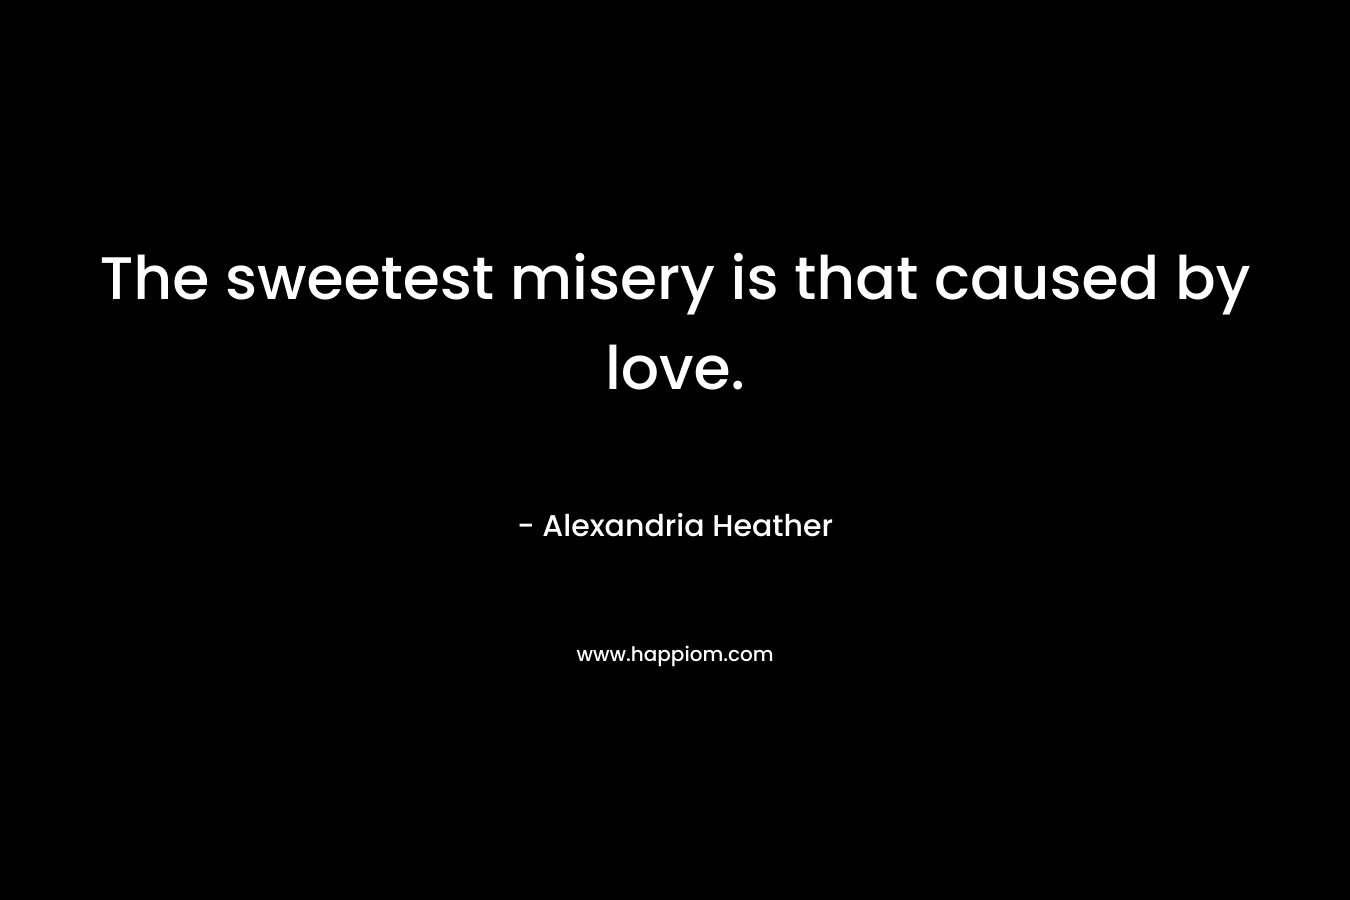 The sweetest misery is that caused by love.